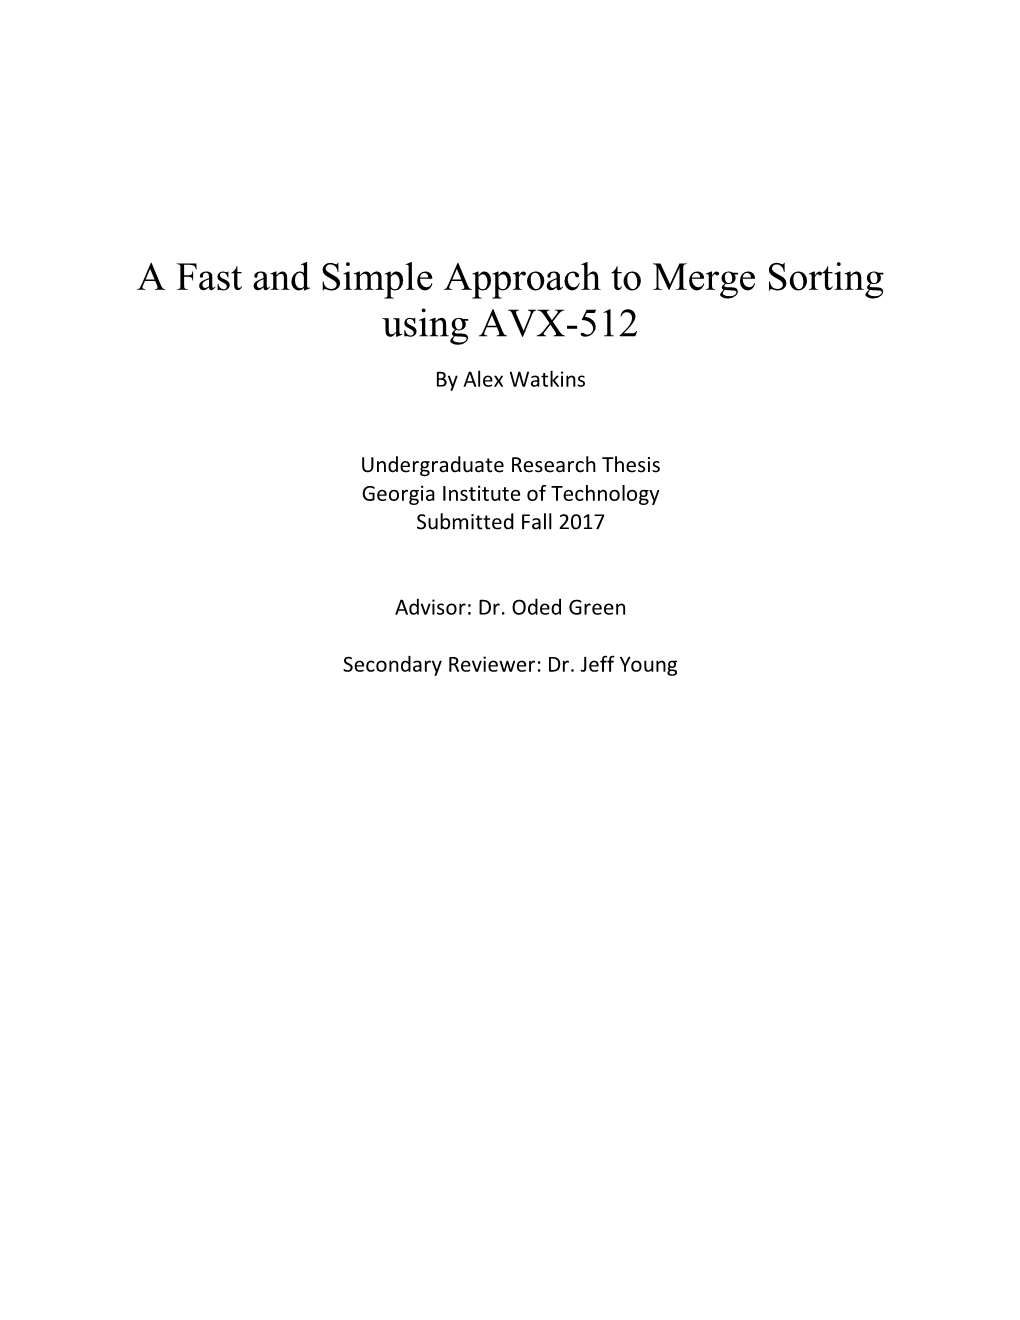 A Fast and Simple Approach to Merge Sorting Using AVX-512